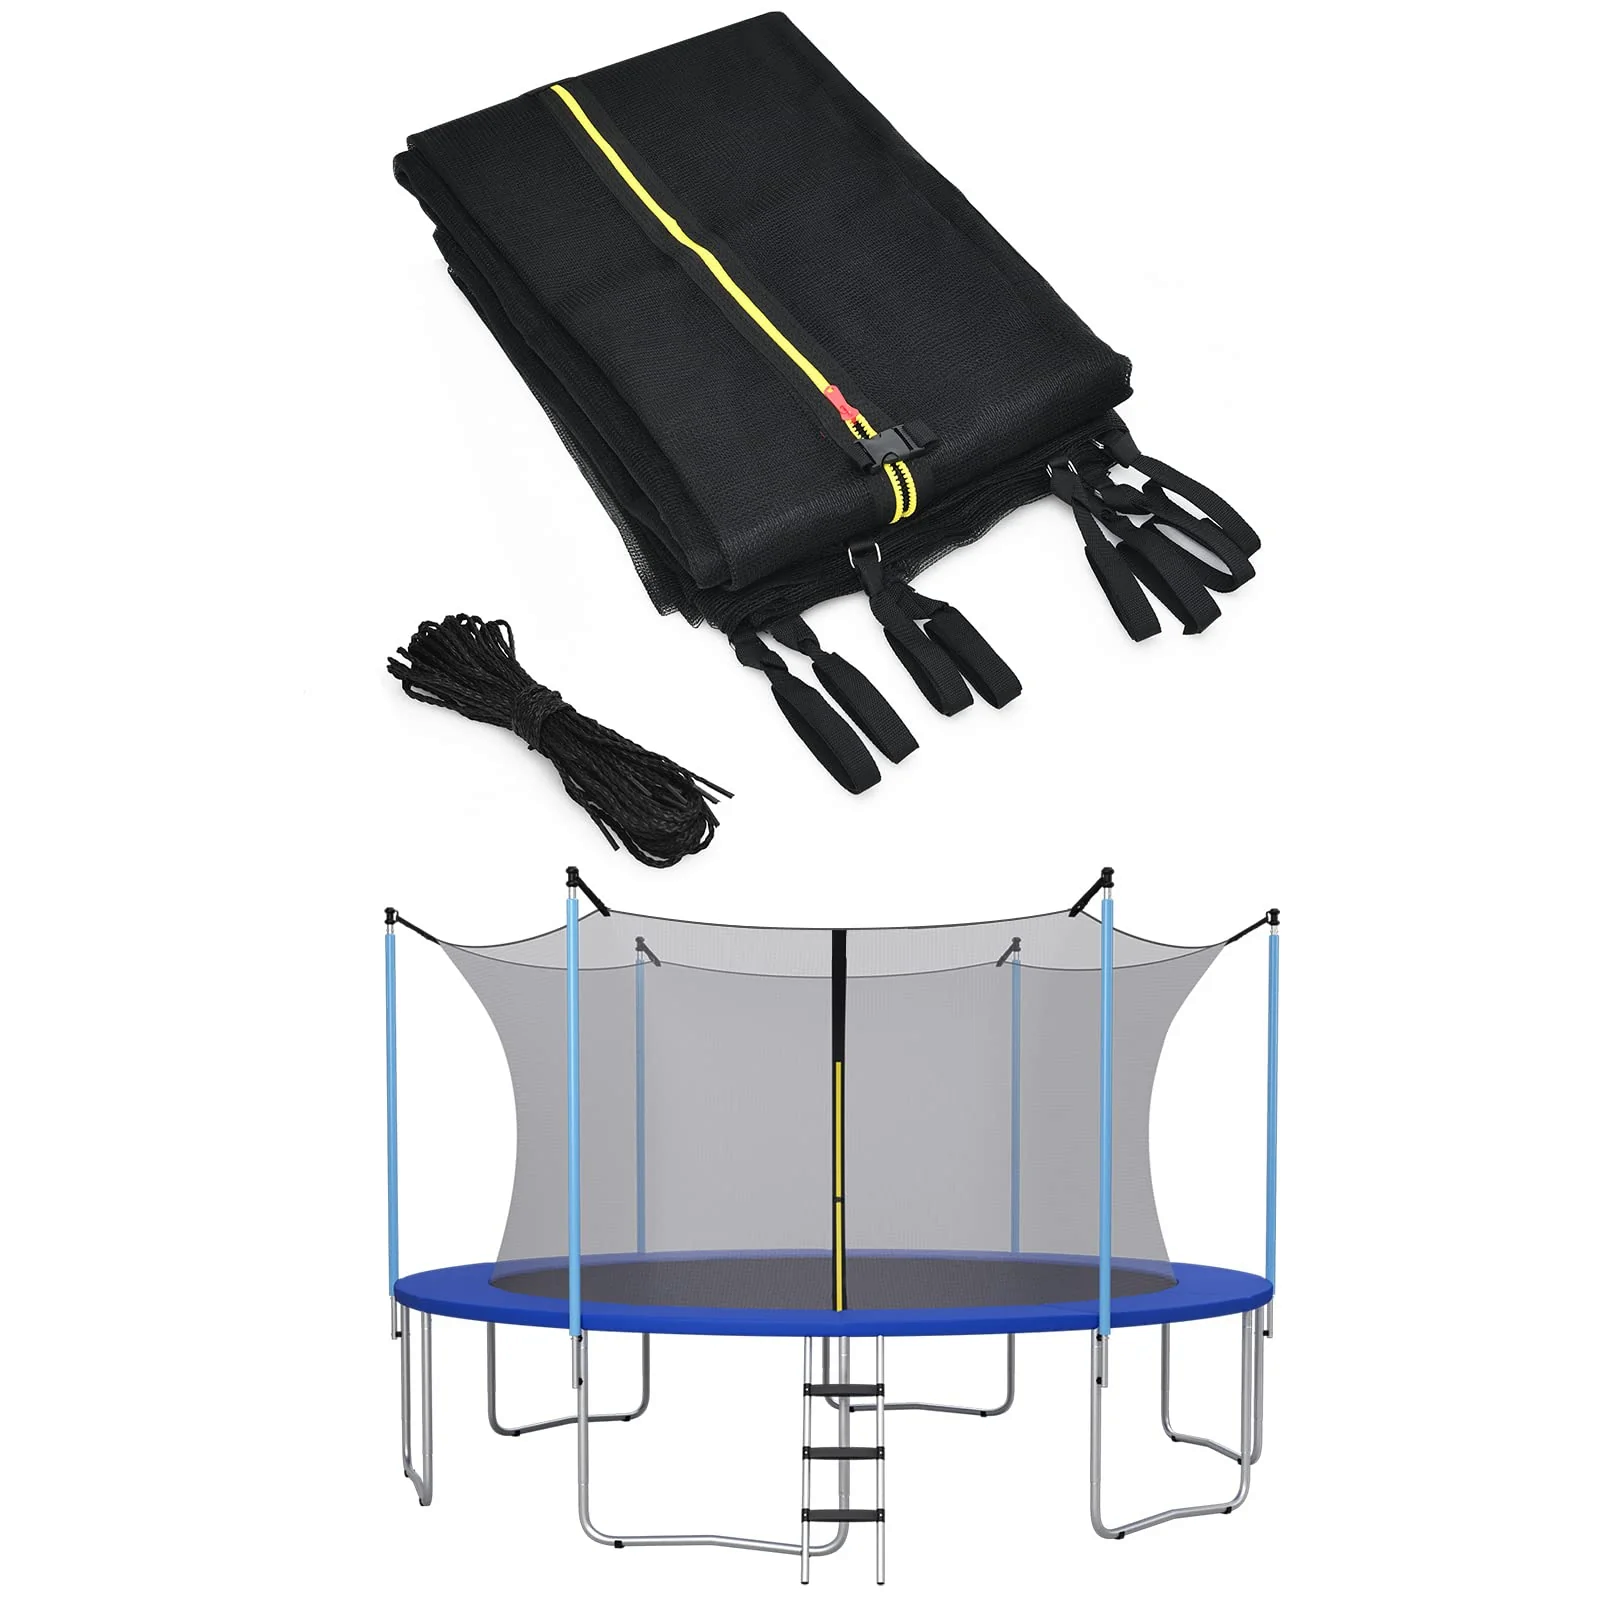 5 FAQs About Trampolines And Trampoline Accessories